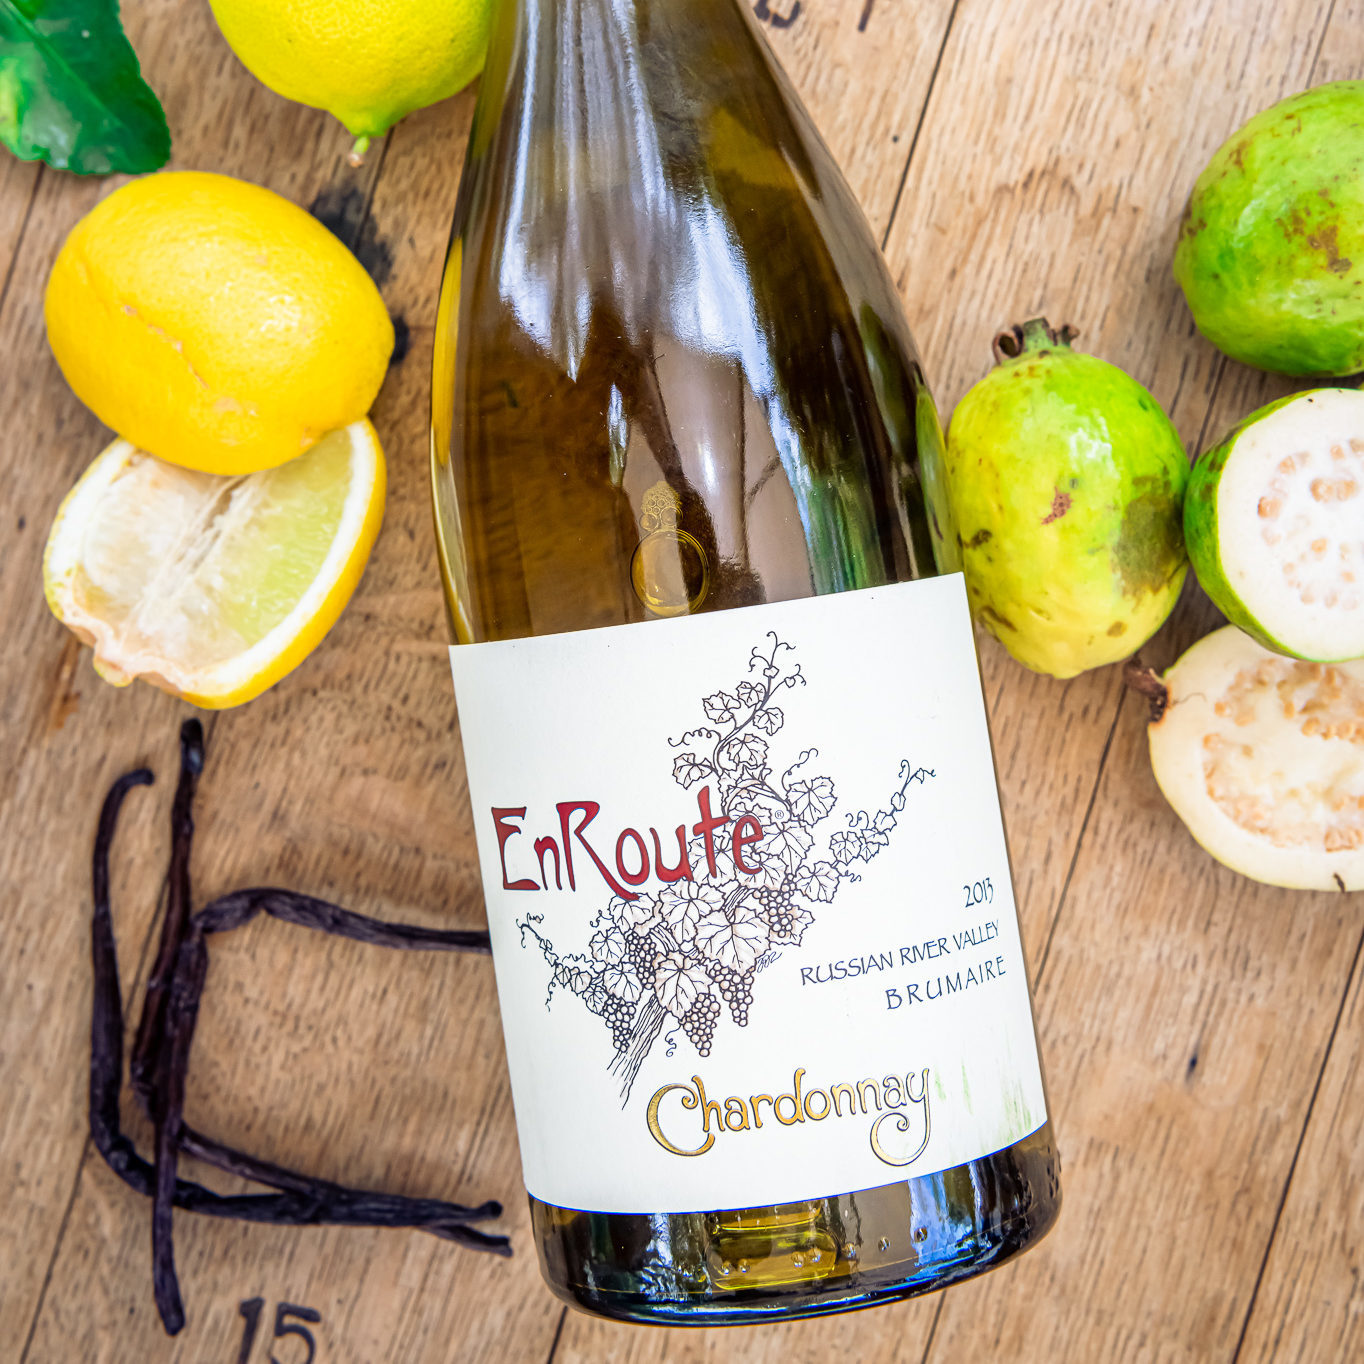 EnRoute Brumaire Russian River Valley Chardonnay Among "50 Best Wines of 2020" - VinePair